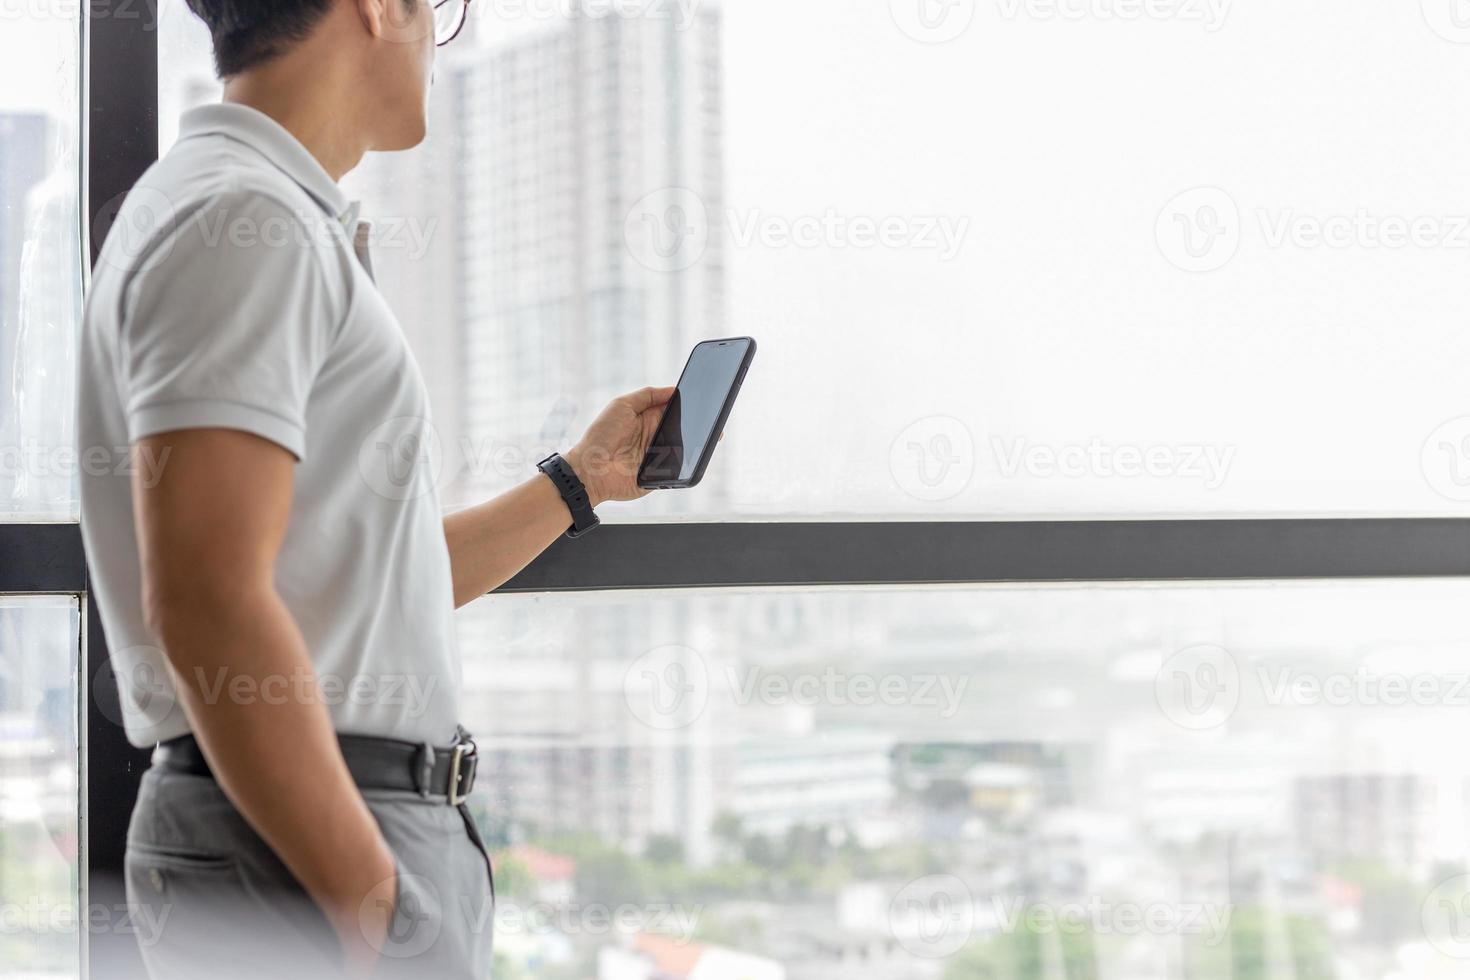 Businessman standing next to big window in modern building looking cell phone photo